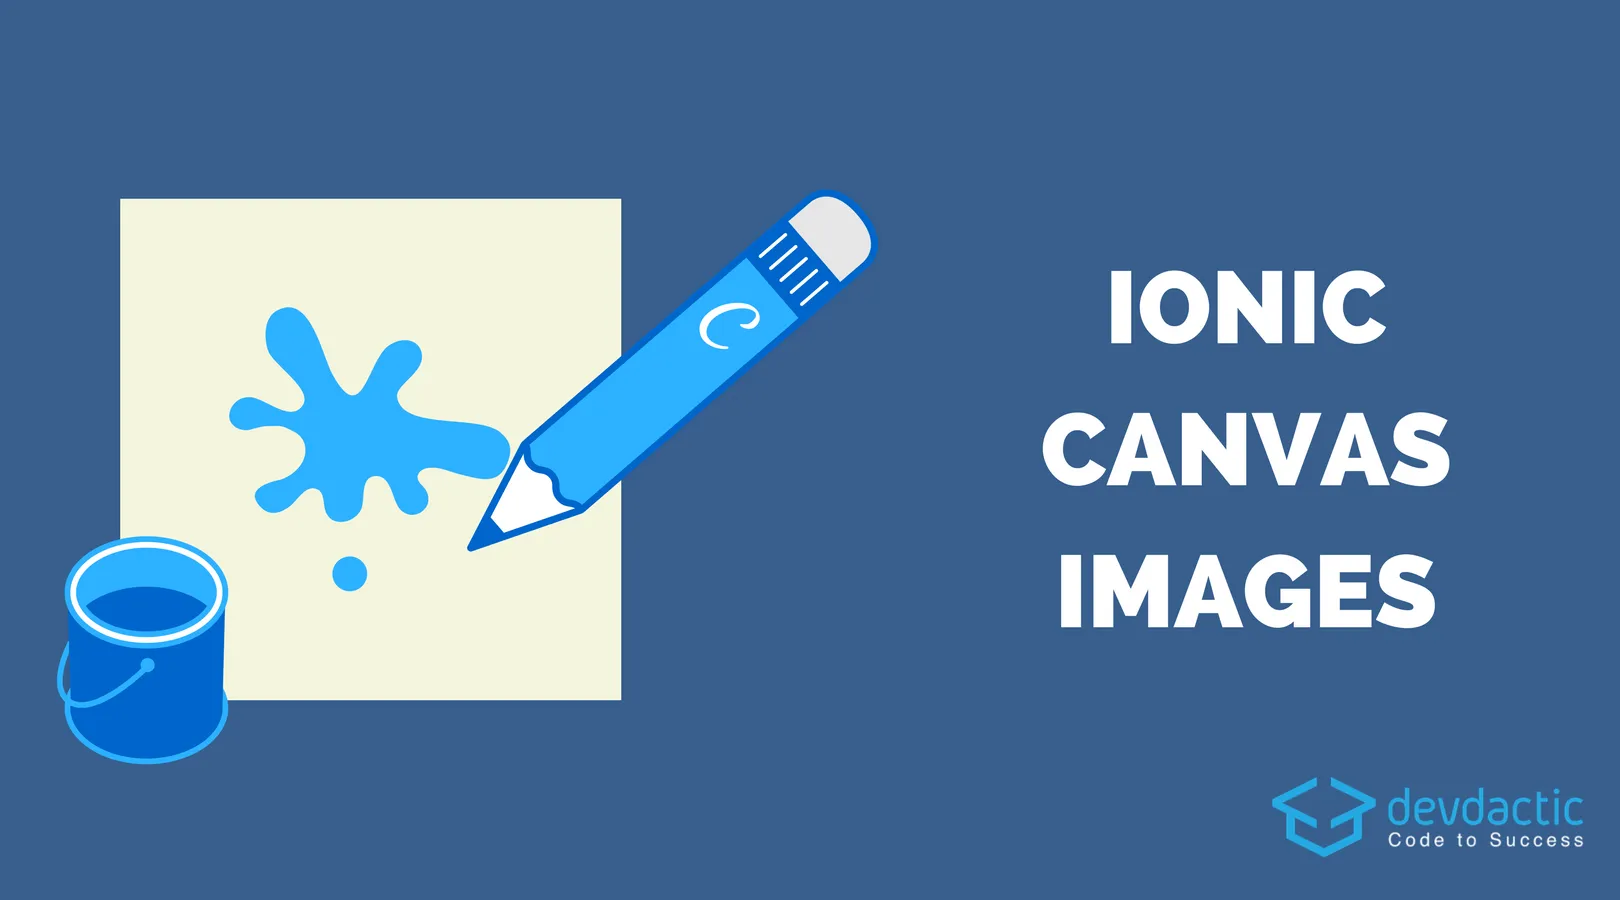 Ionic Canvas Drawing and Saving Images as Files